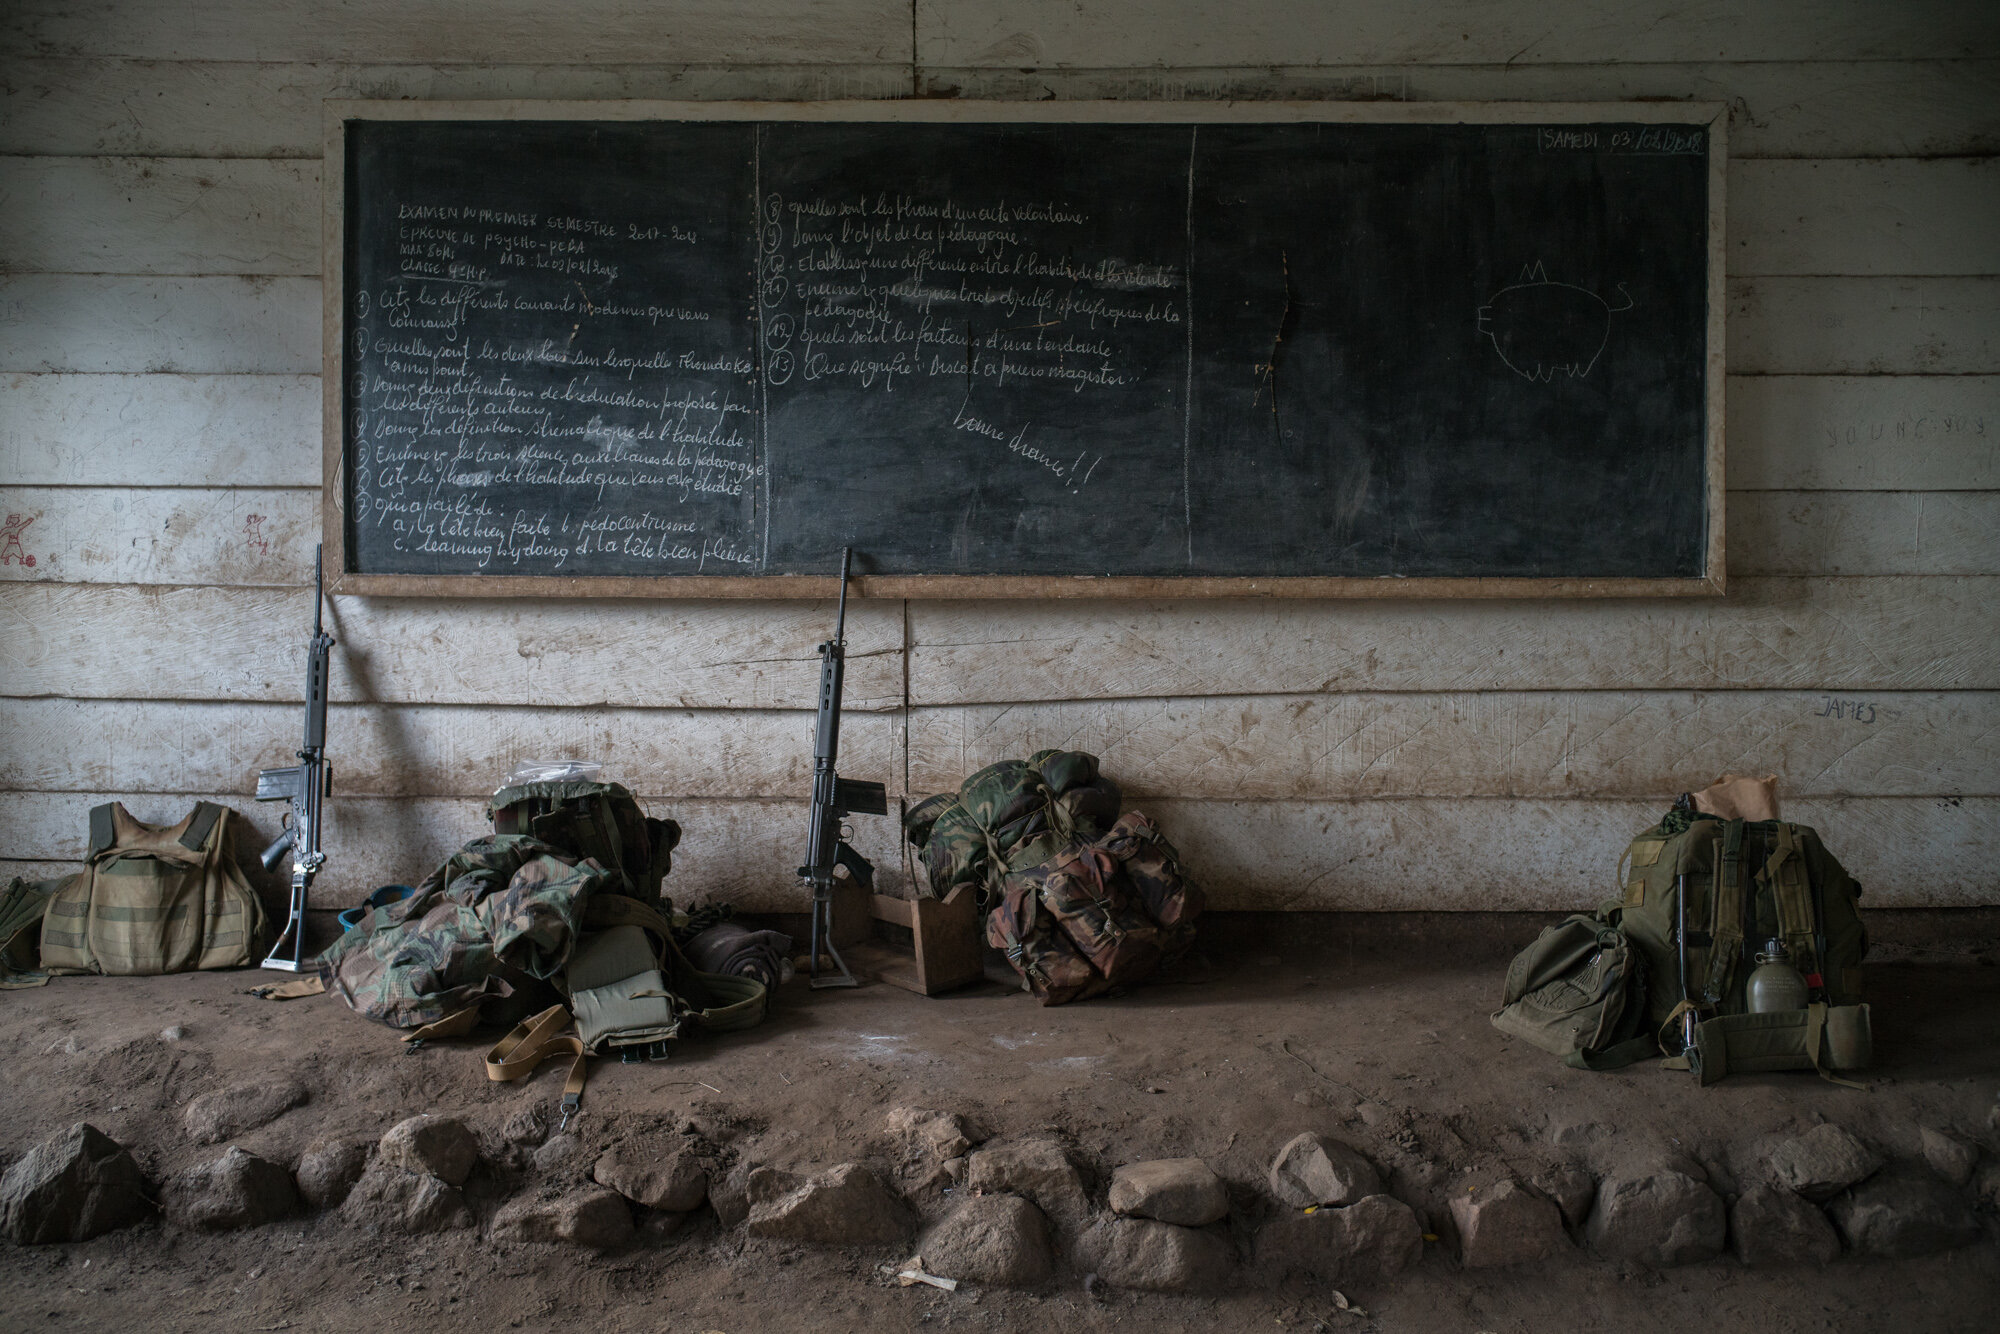  Uruguyan peacekeepers set up a makeshift base for the night in the abandonded school in Joo, one of the villages along the coast of Lake Albert, deserted and decimated after attacks on March 12 that left a reportedly 42 people massacred across the v